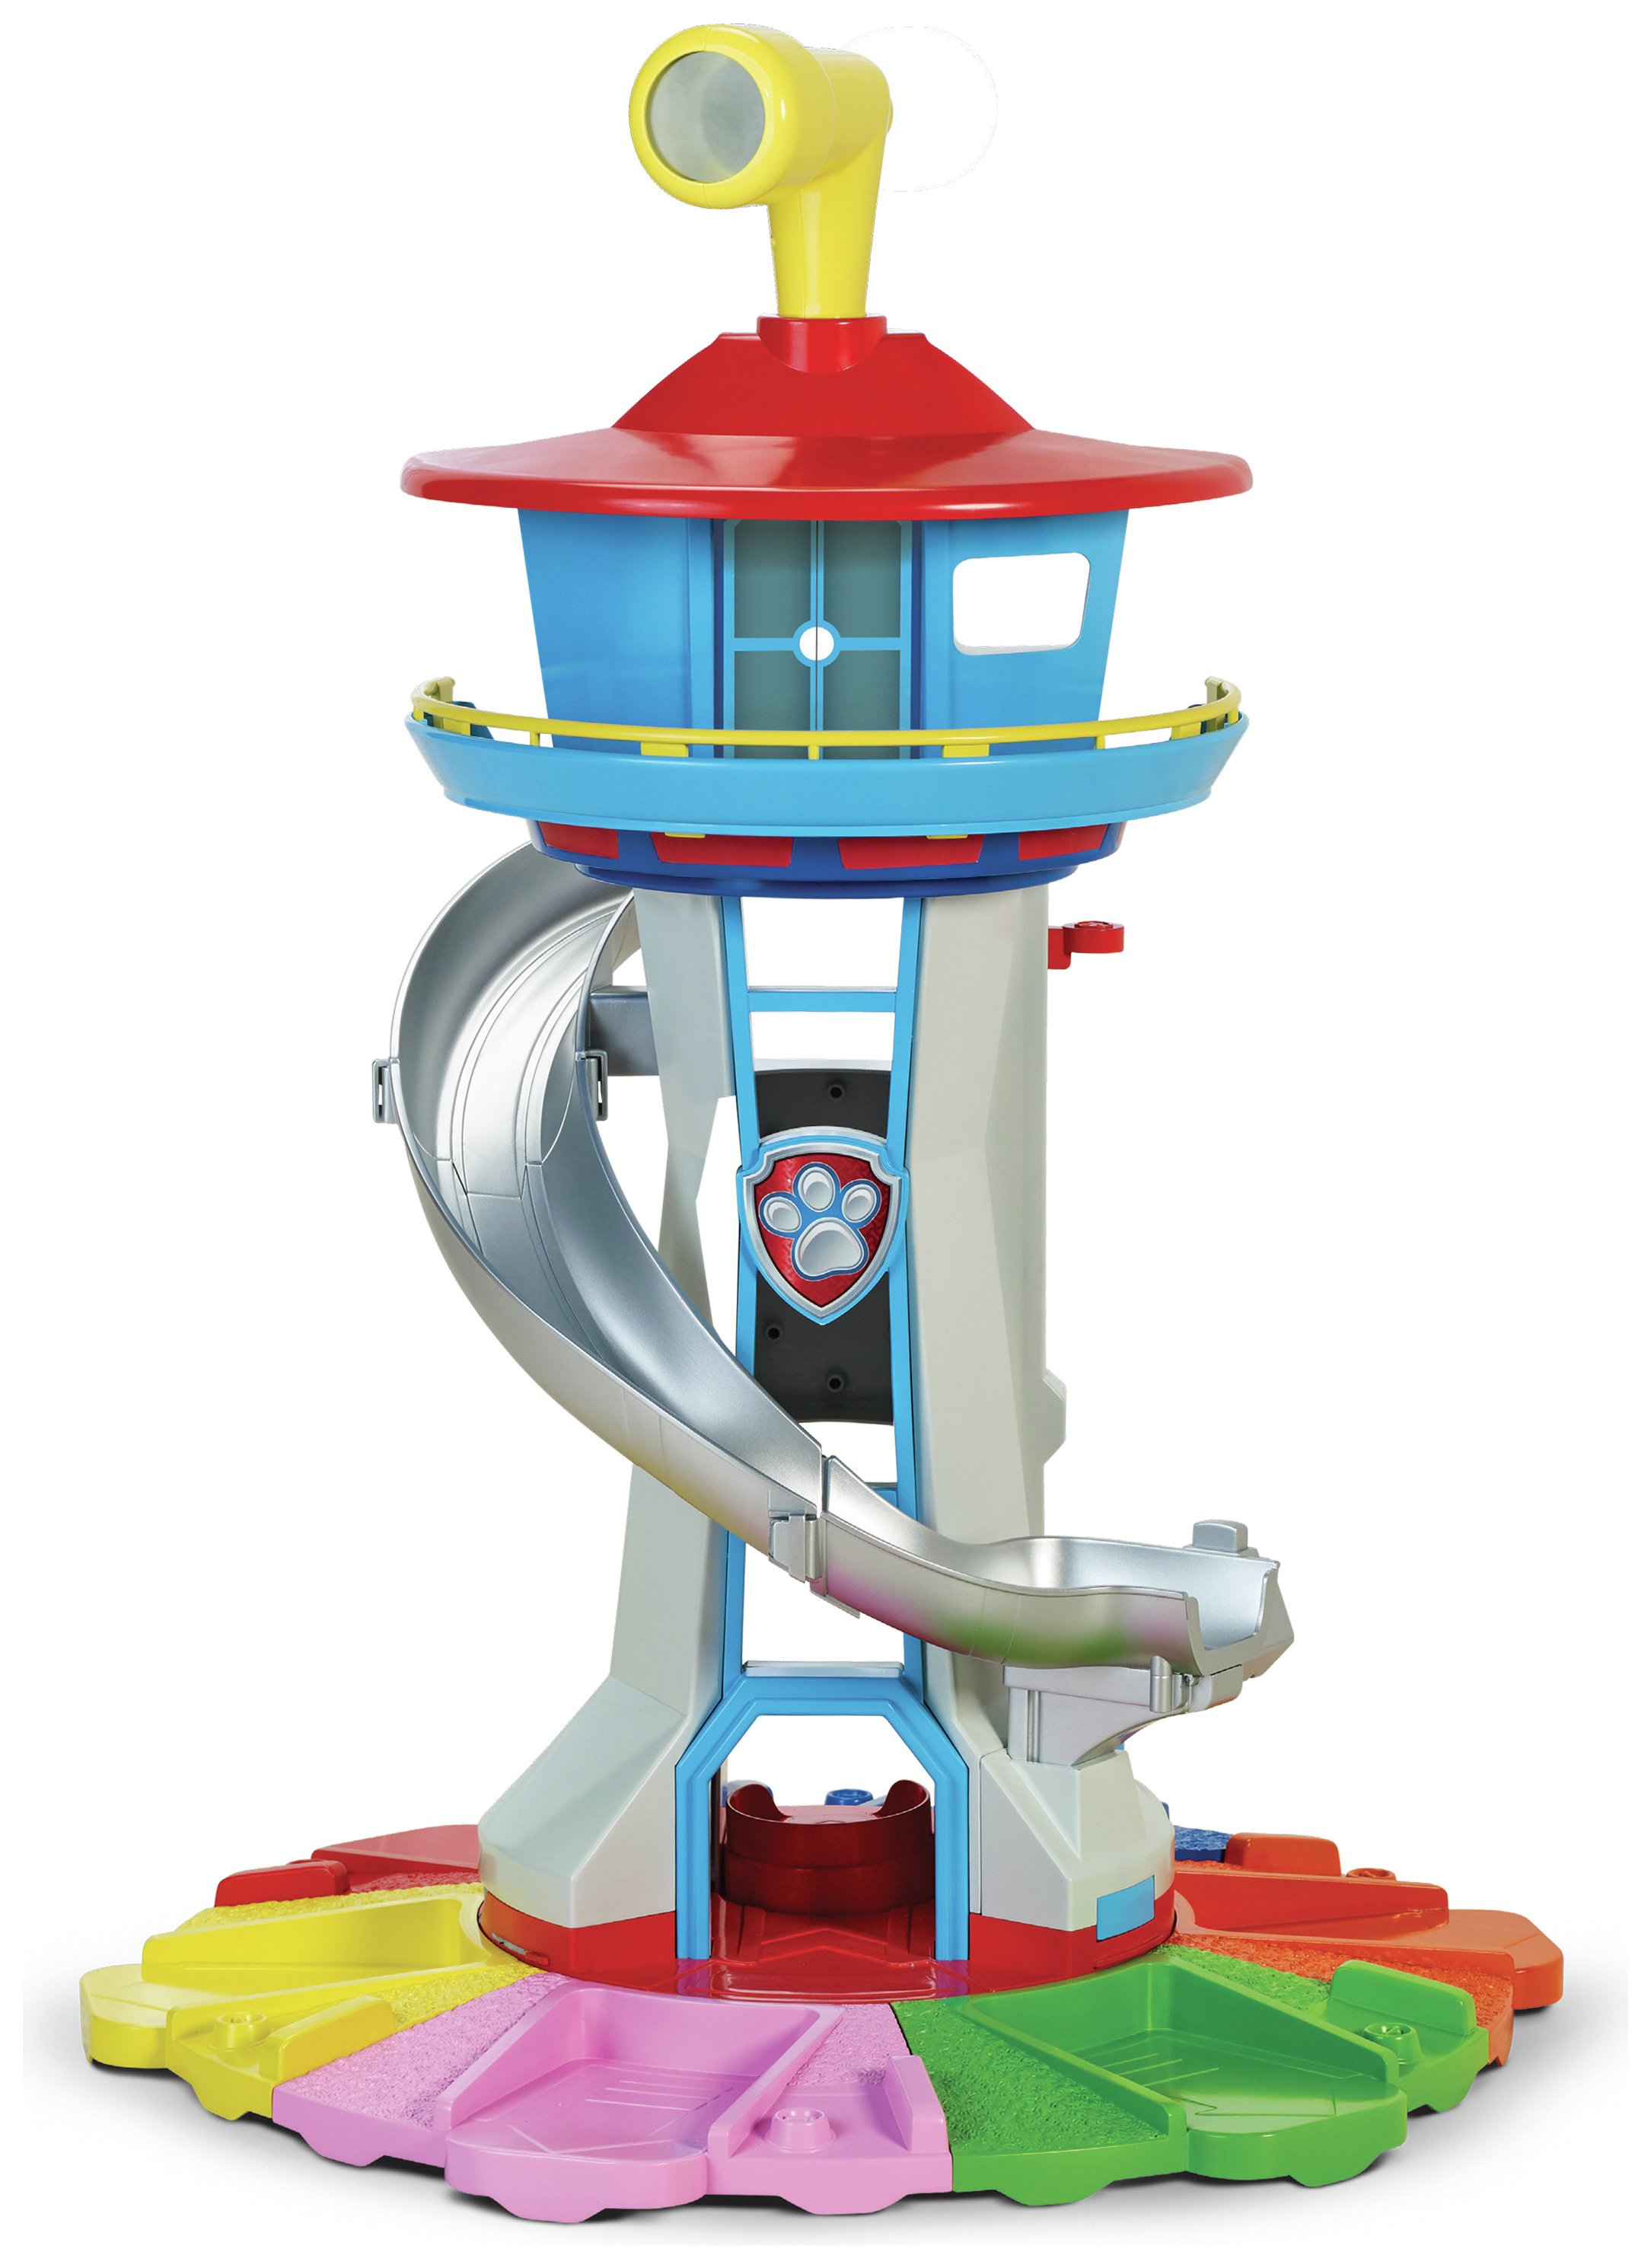 PAW Patrol My Size Lookout Tower Playset Reviews